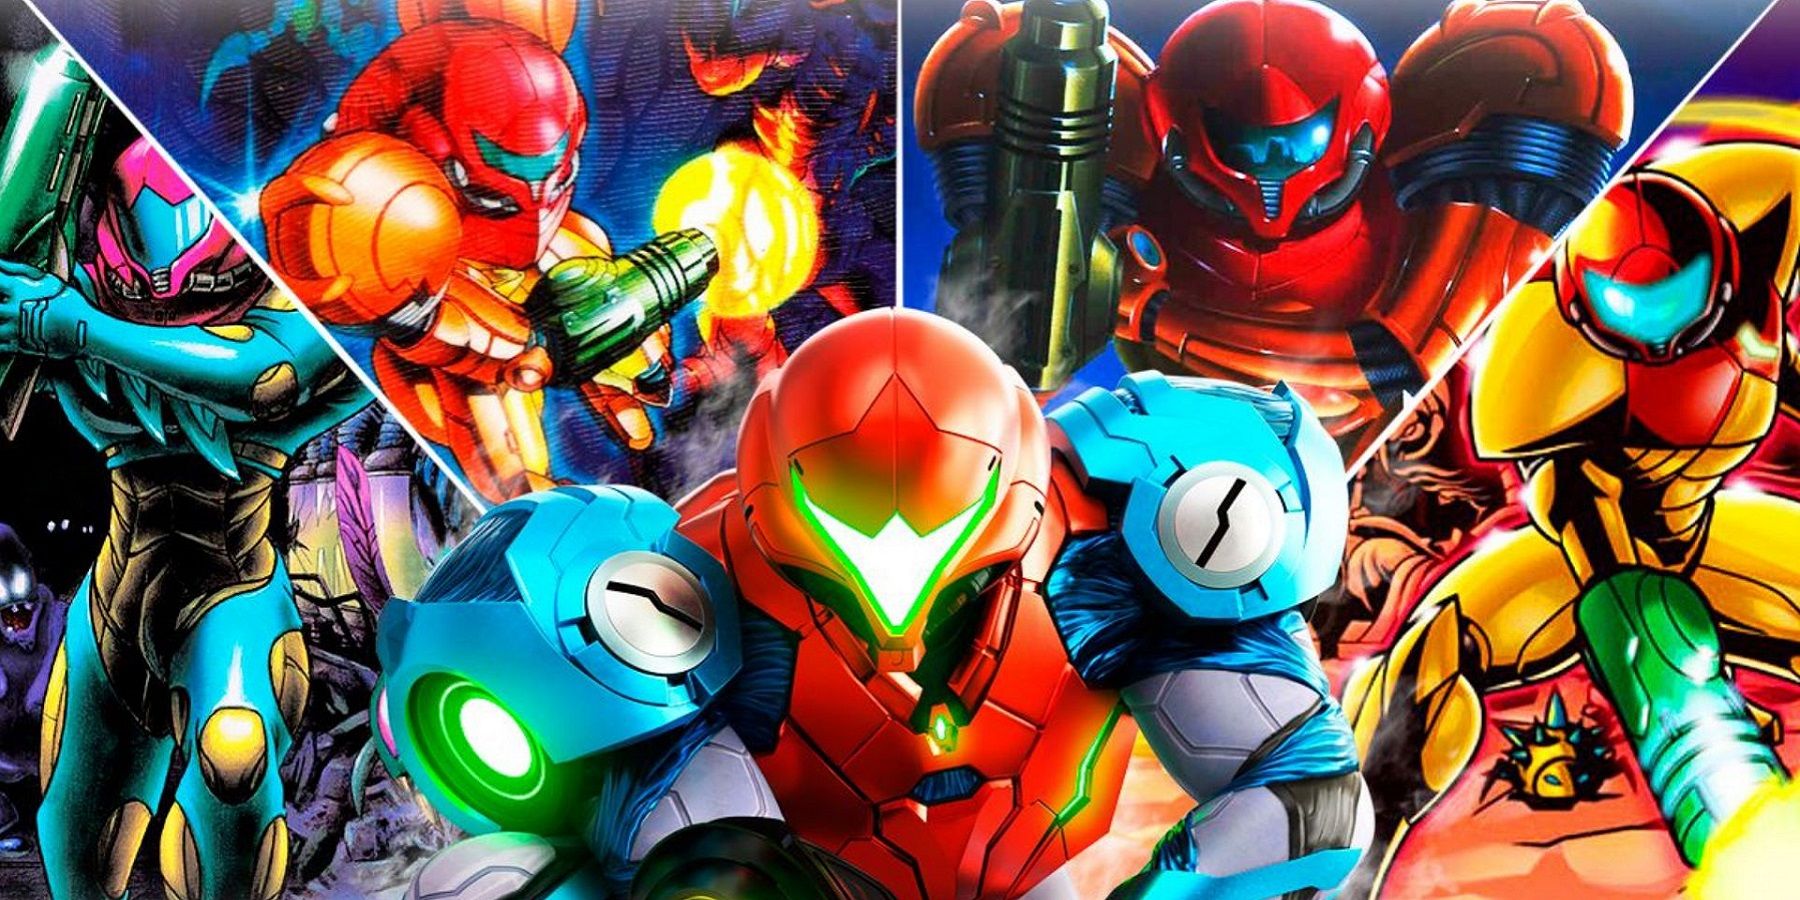 An image showing various and birghtly-colored Samus Arans from Metroid Dread and other Metroid games.